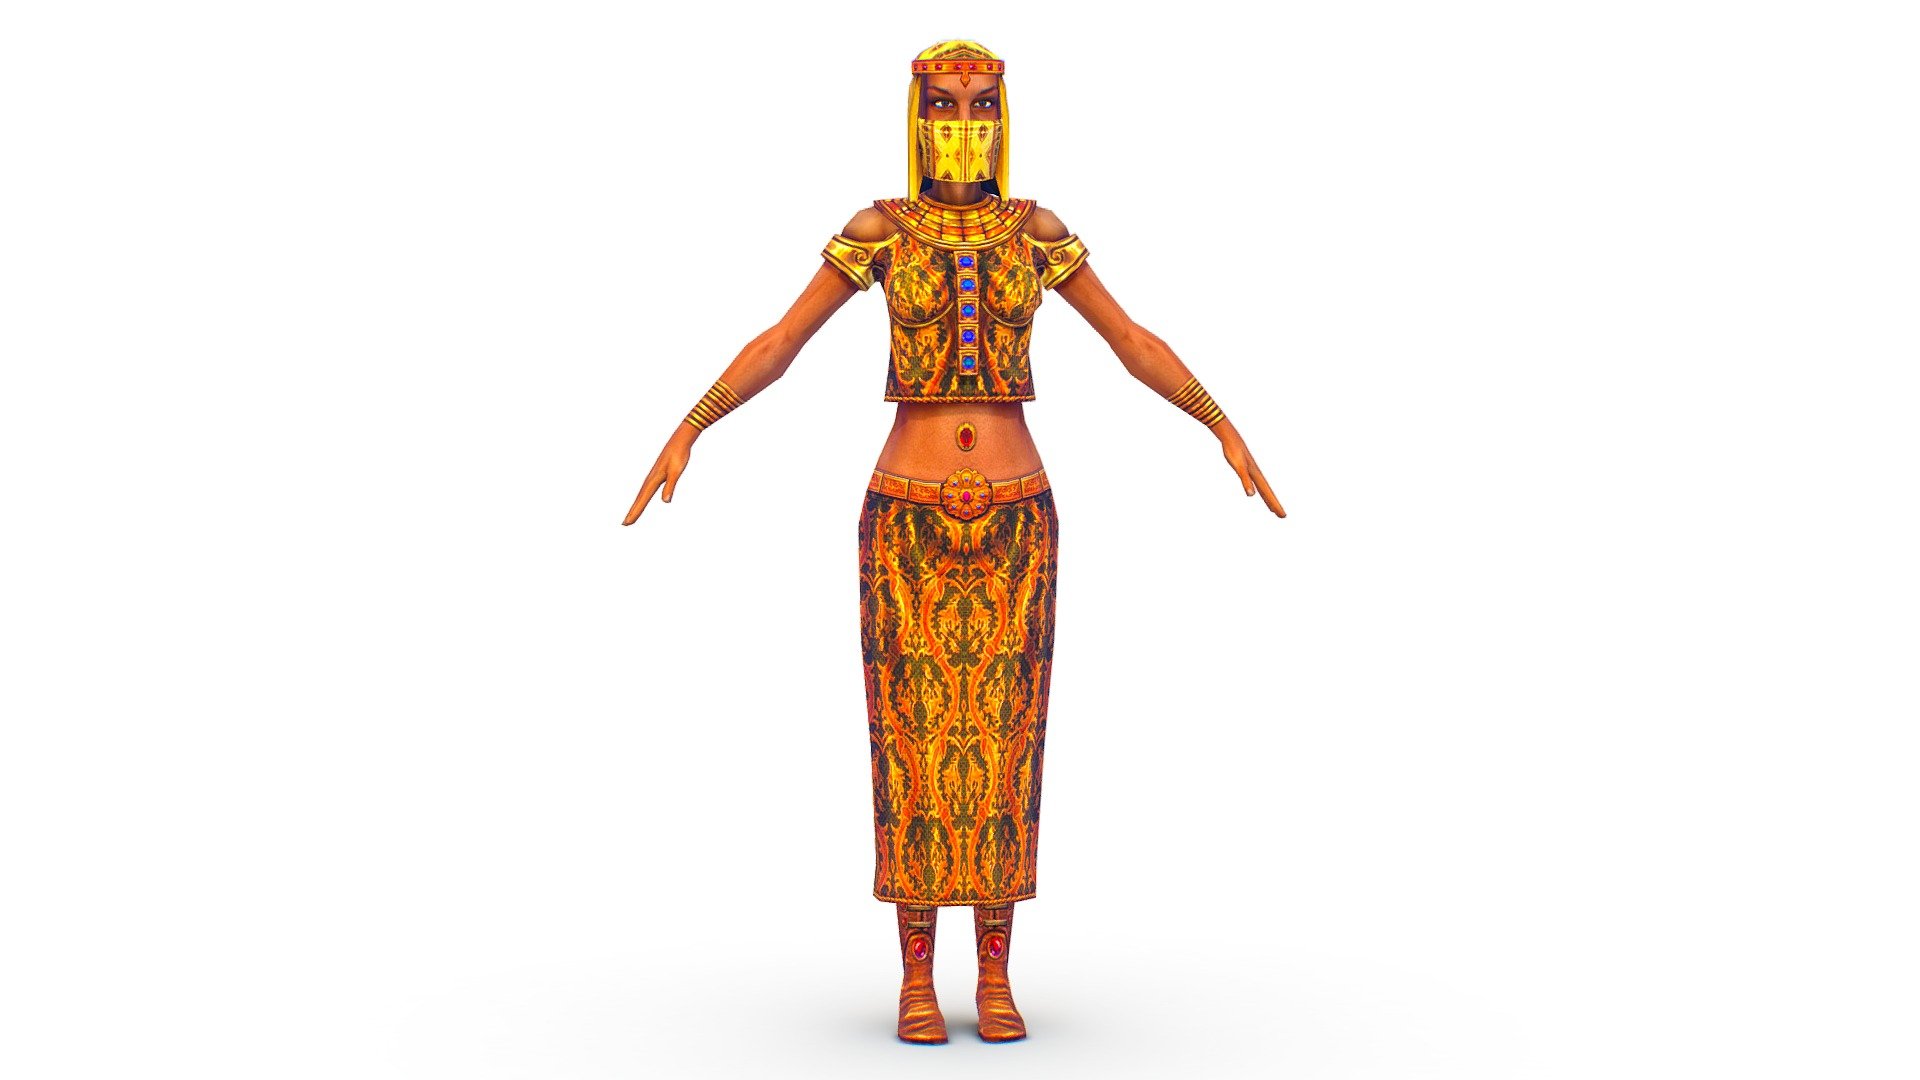 Arab dancer in national costume - 3dsMax file included/ texture 512 color only 3d model